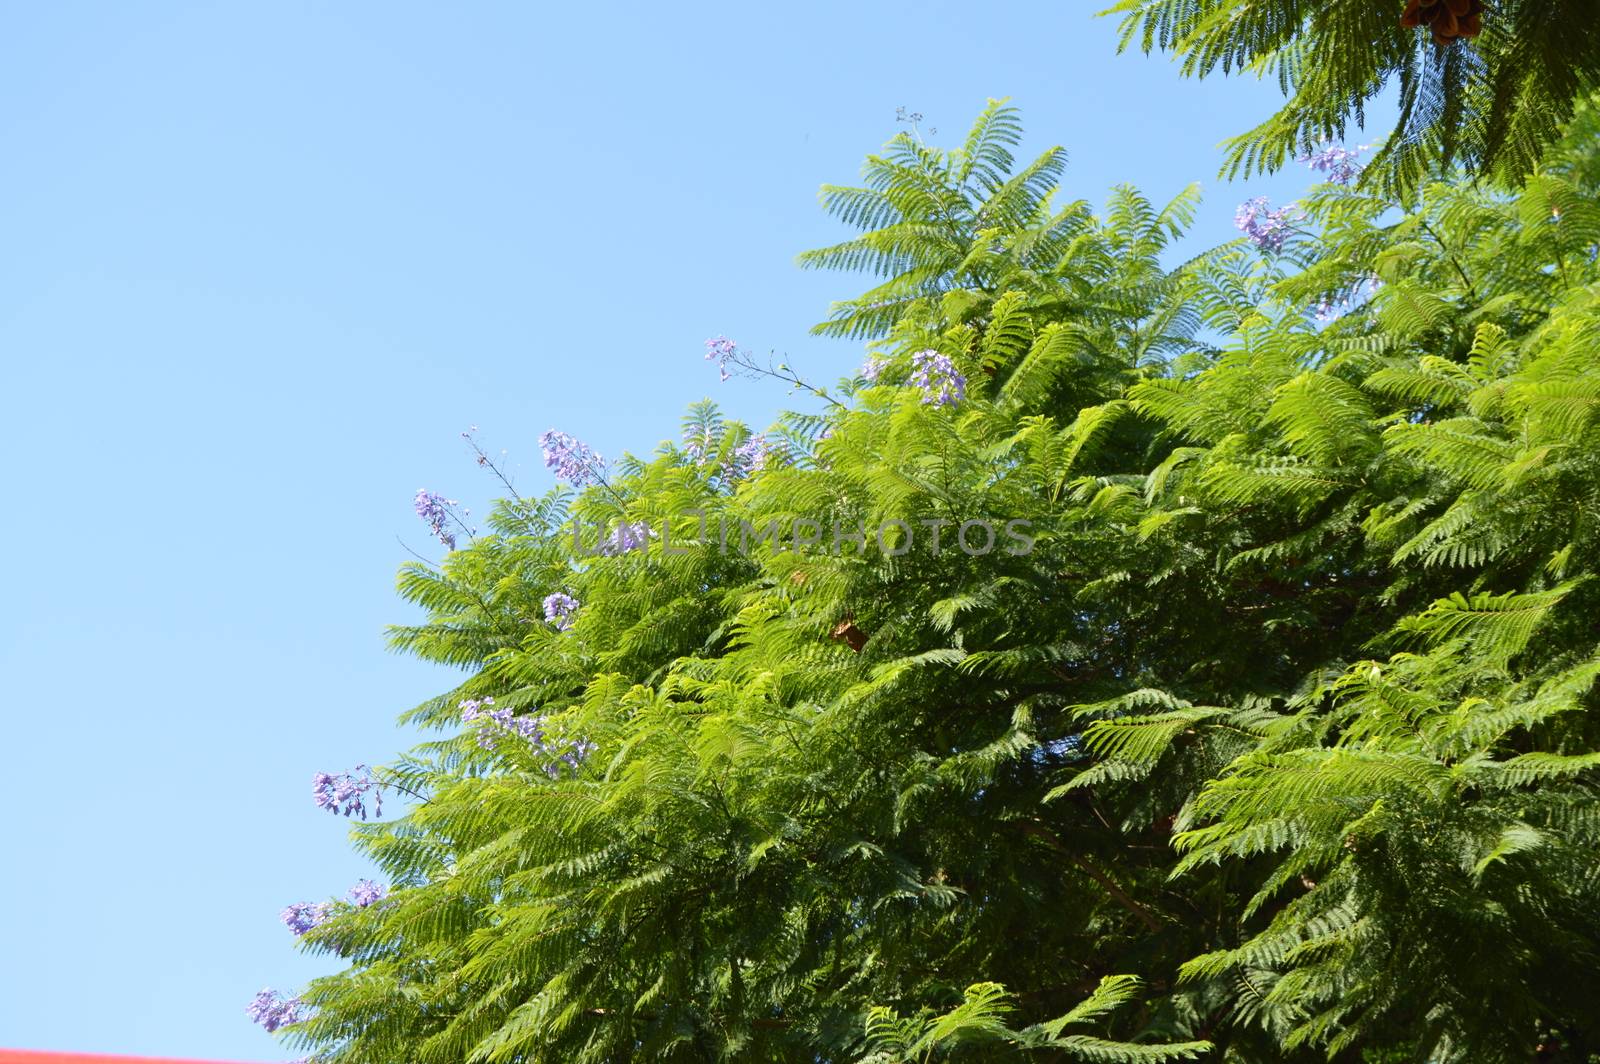 Close-up of Jacaranda fern tree branches with purple flowers on blue sky background, Jacaranda Mimosifolia by claire_lucia